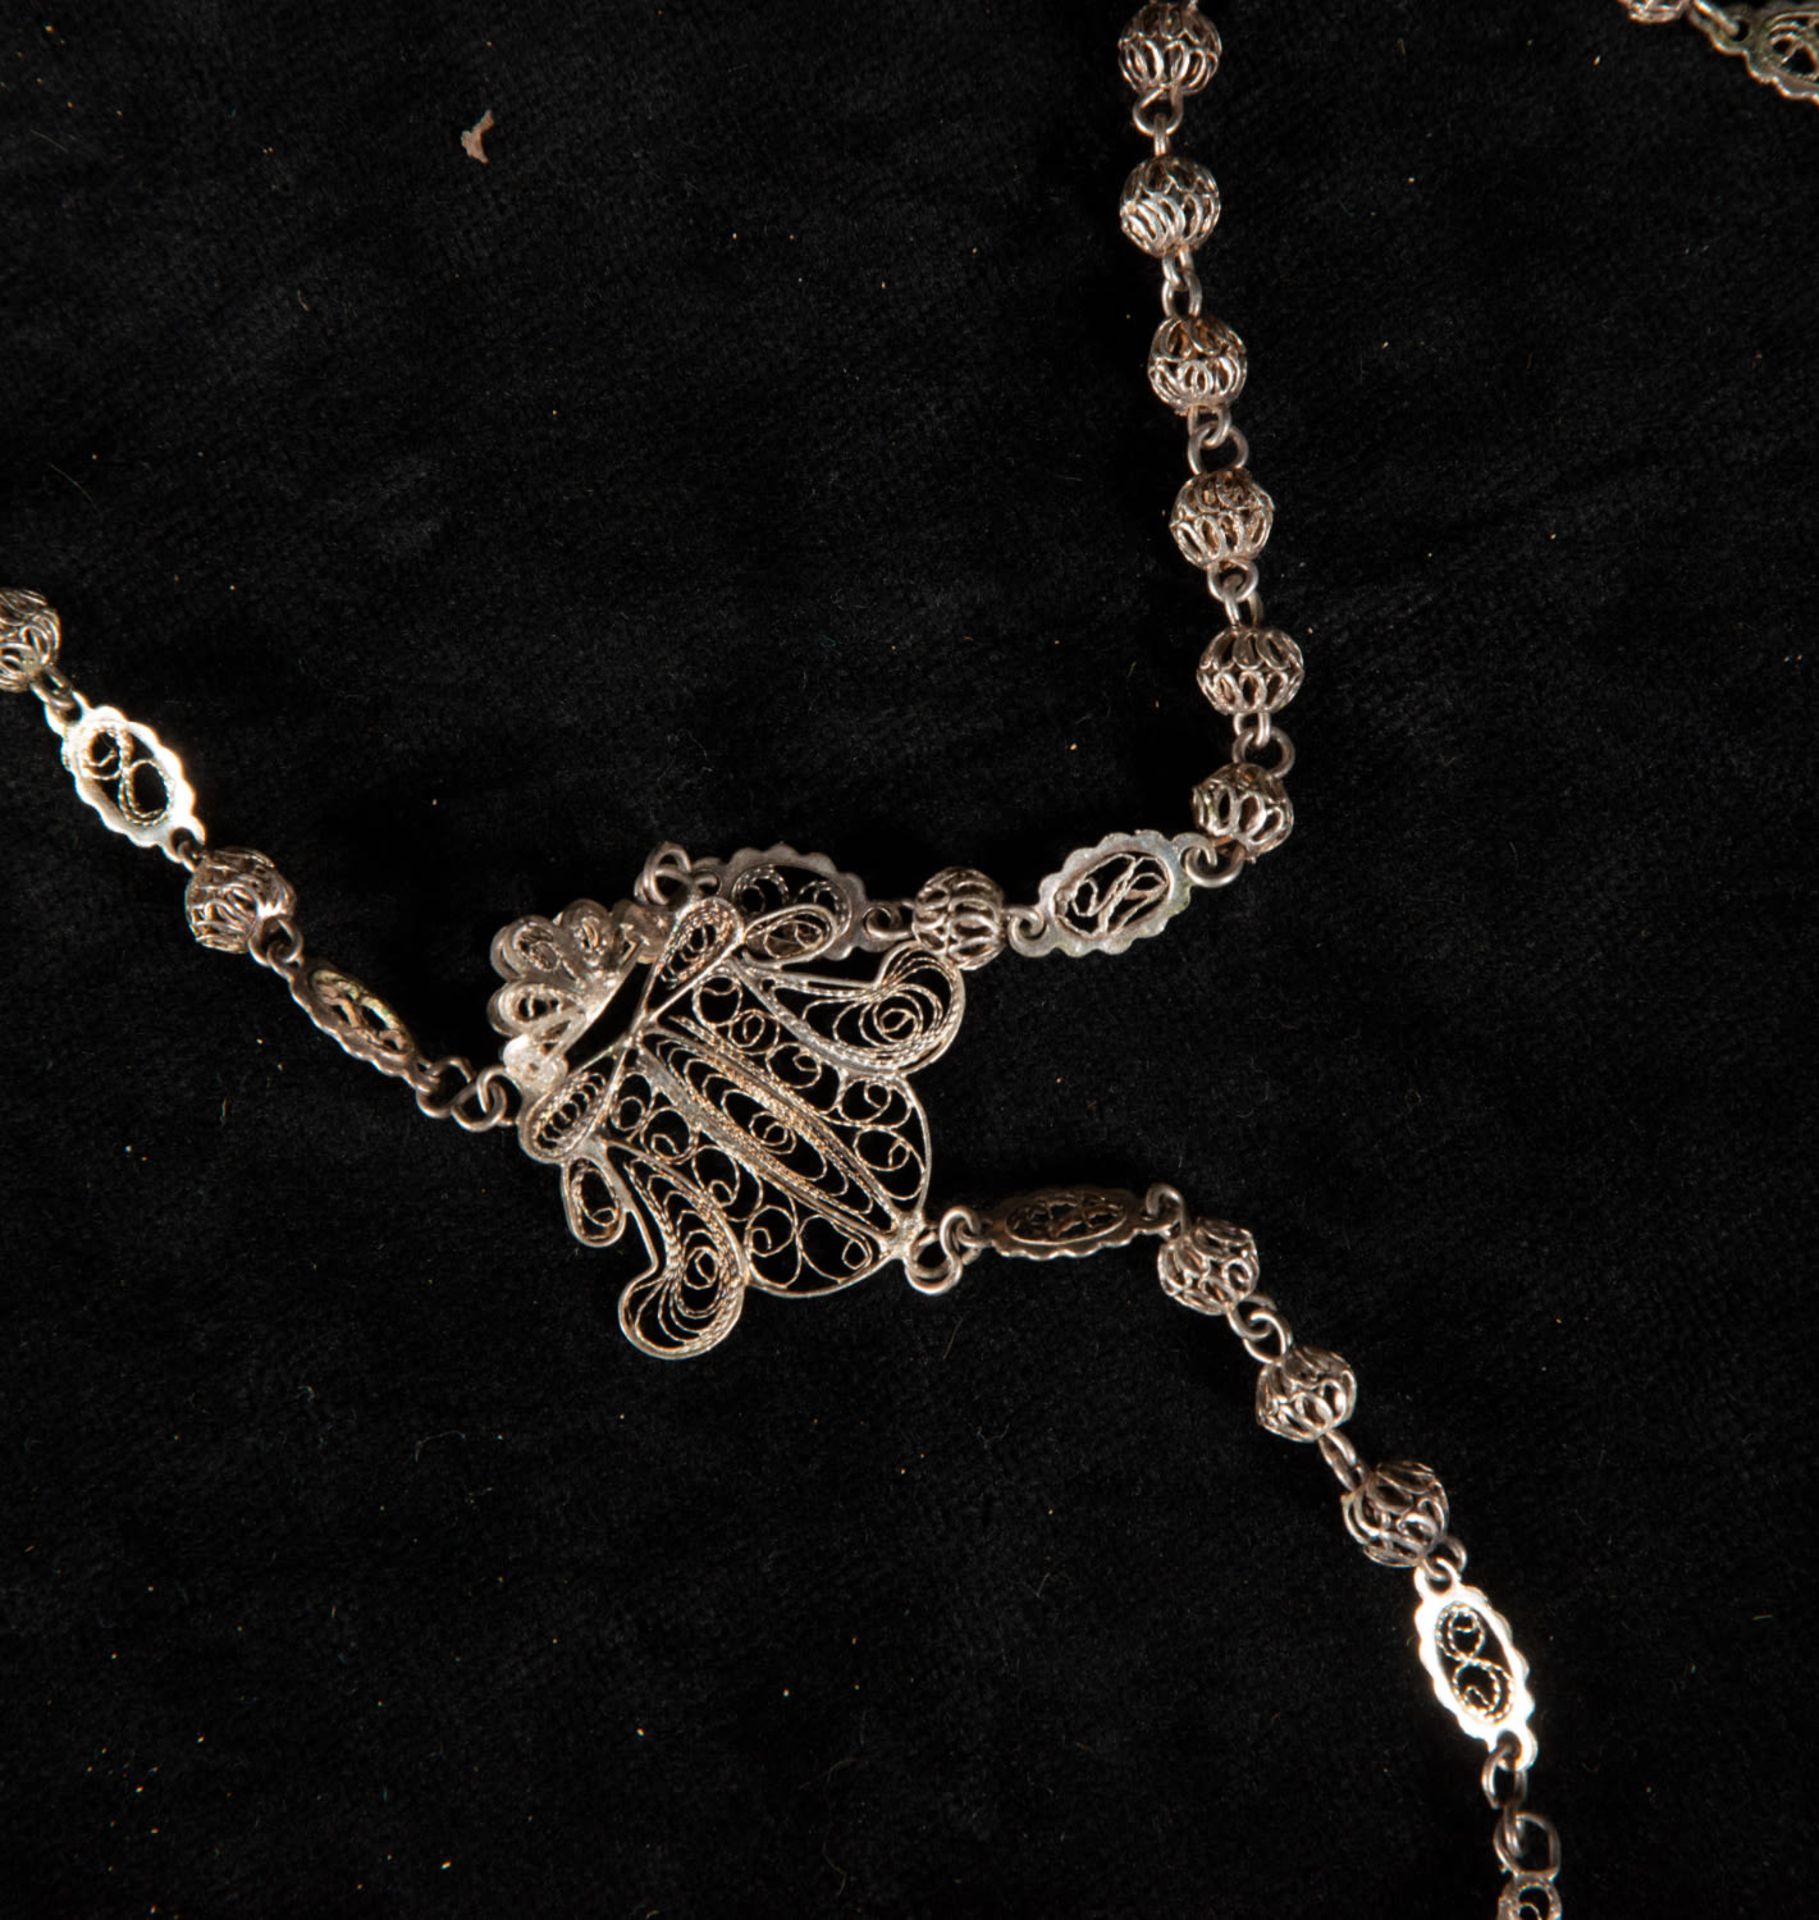 19th century silver filigree rosary - Image 4 of 4